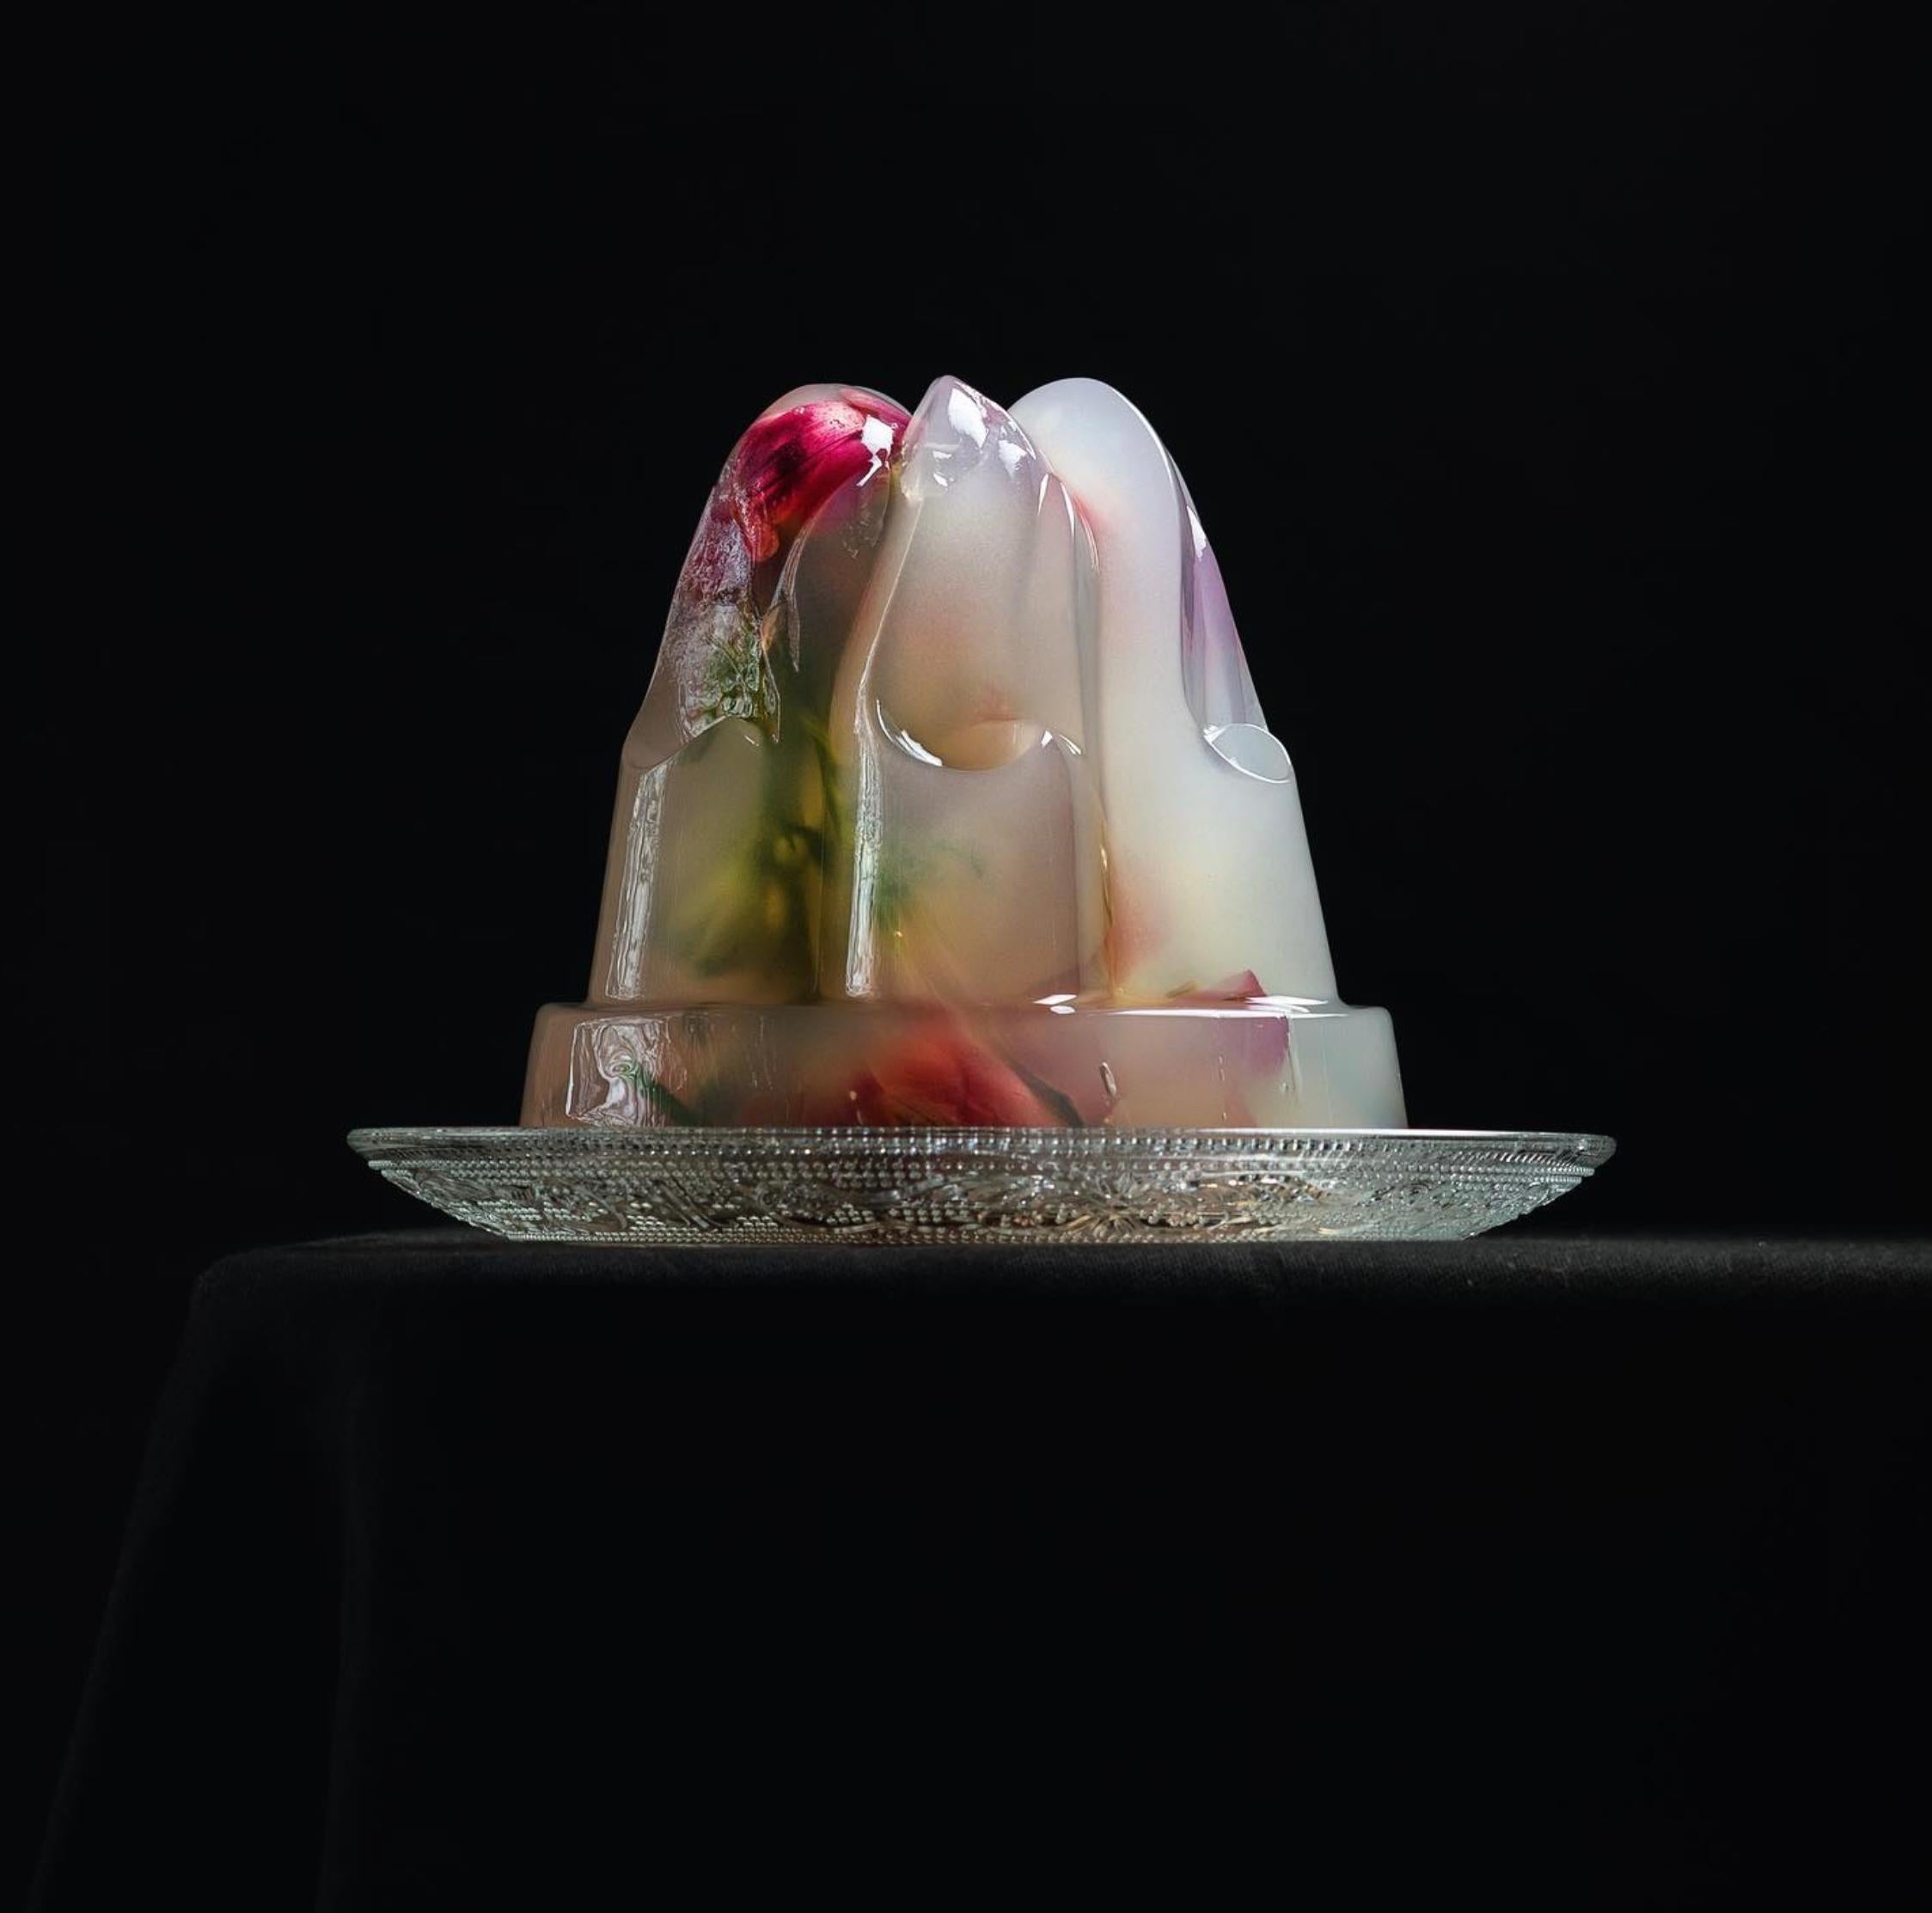 Ursula van de Bunte Still-Life Photograph - ''Flowers Jelly'' Dutch Contemporary Still-Life of a Pudding with Pink Flowers